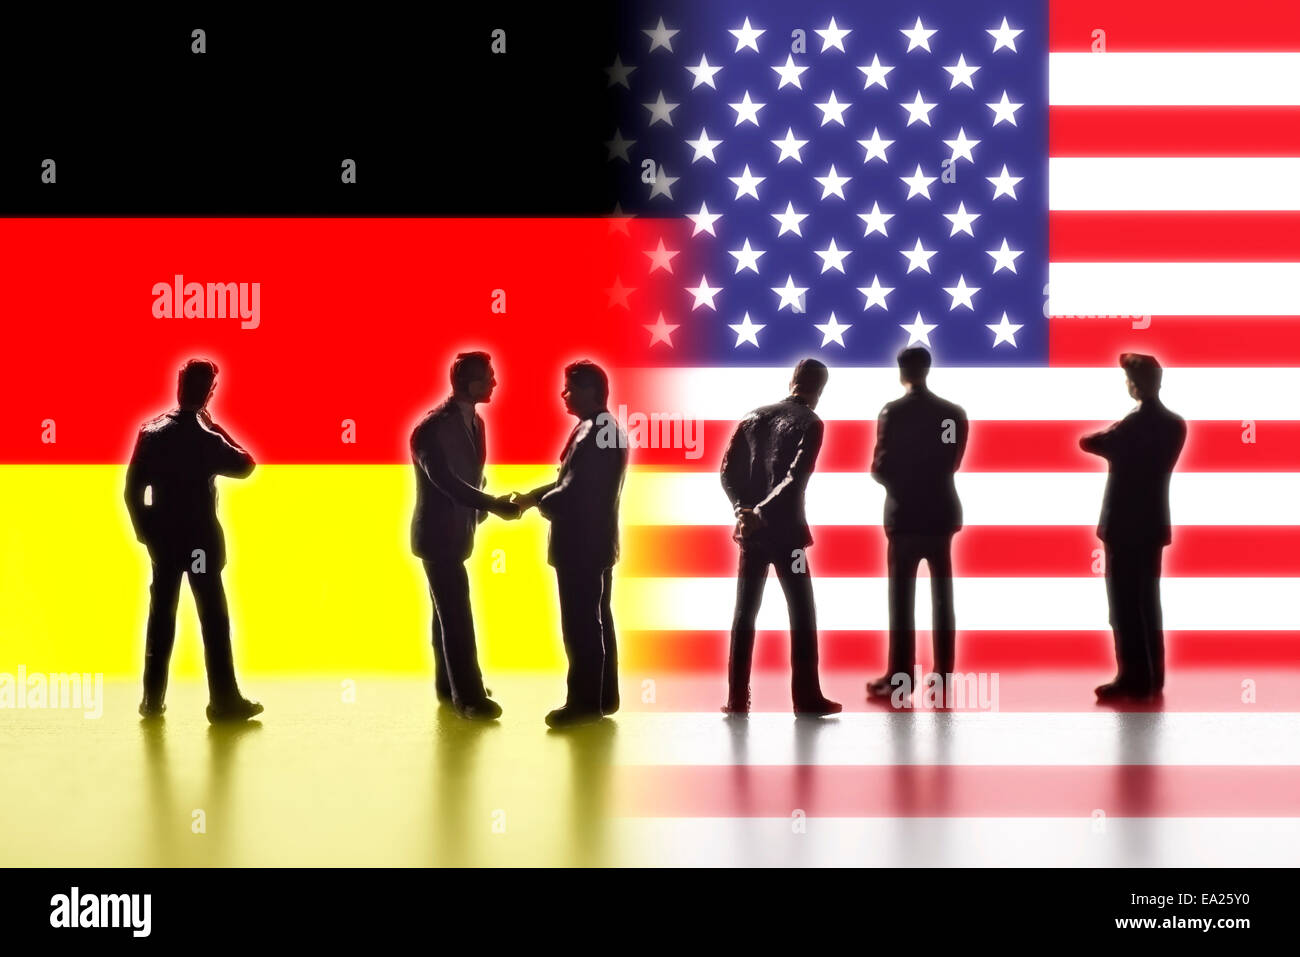 Model figures symbolizing politicians are facing the flags of the USA and Germany. Two of them shake hands. Stock Photo